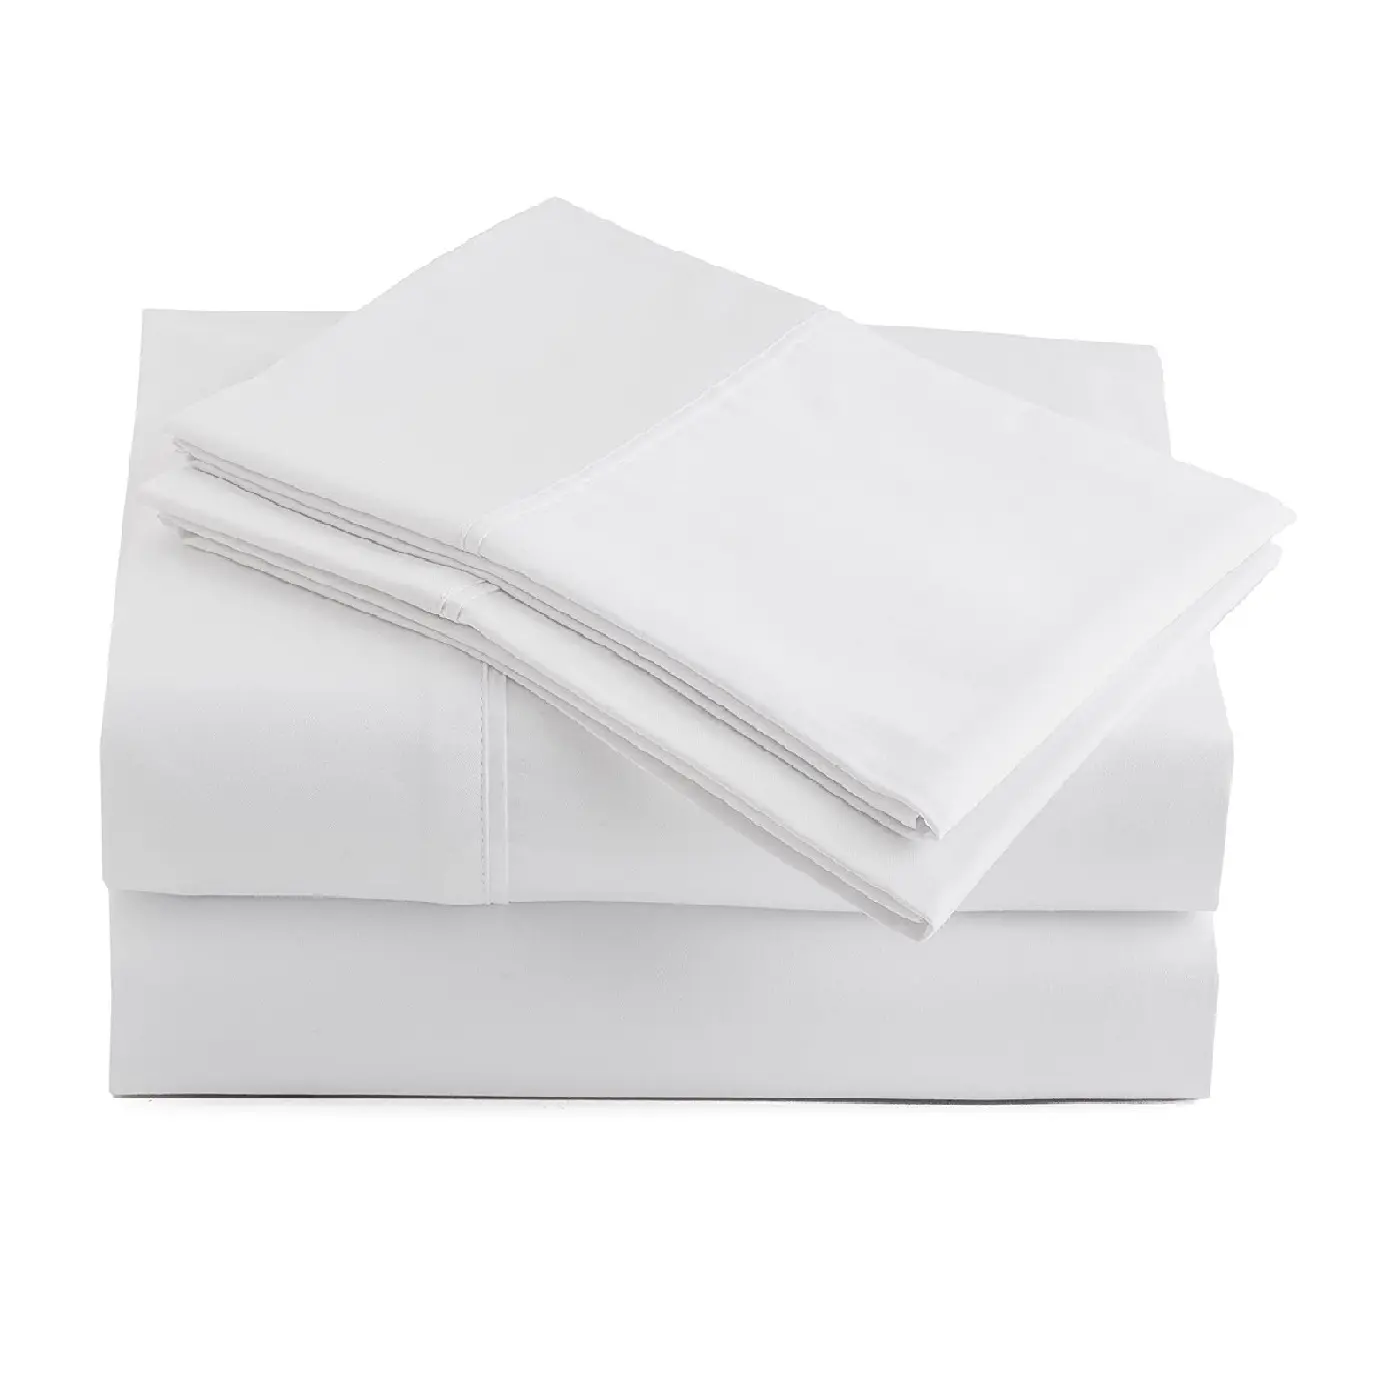 T200 Tread Count plain White Twin size hotel hospital used white bleached bed sheet single flat sheet